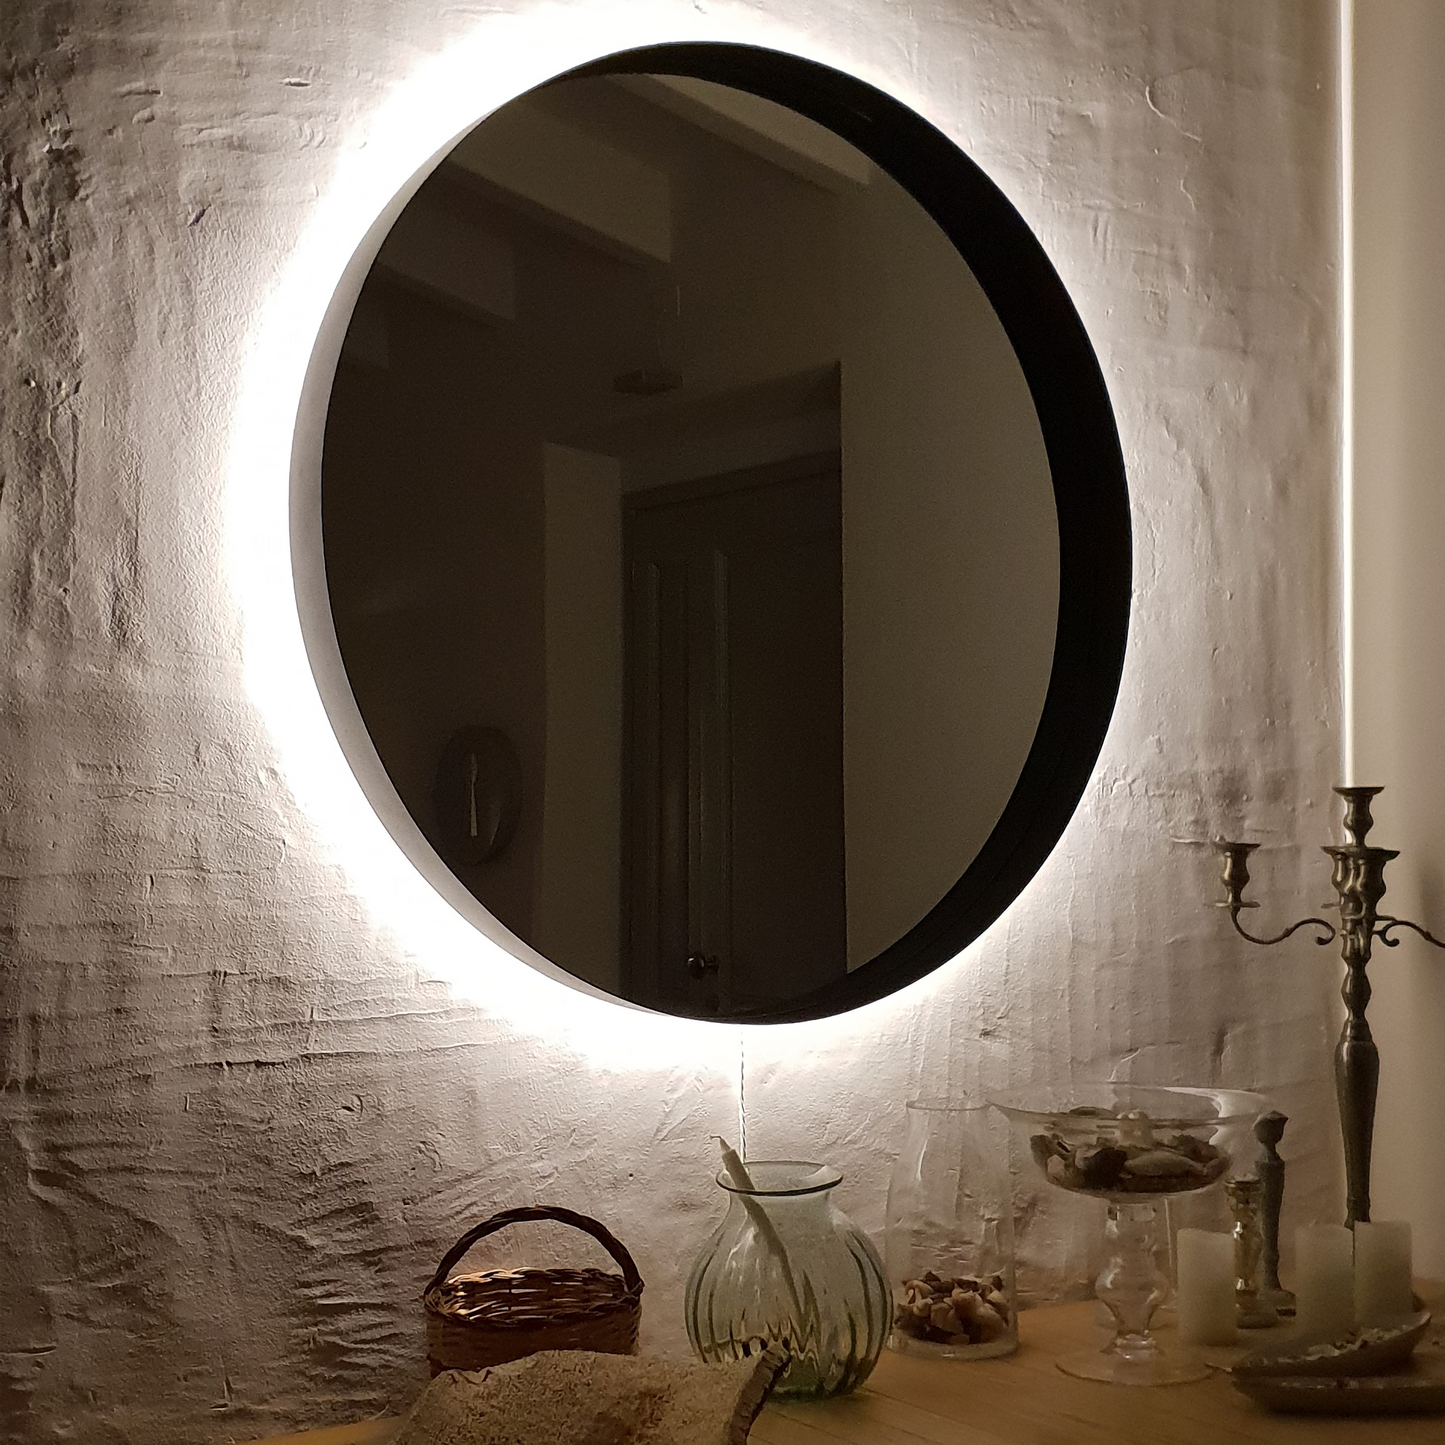 Large circular wall mirror with white backlight.